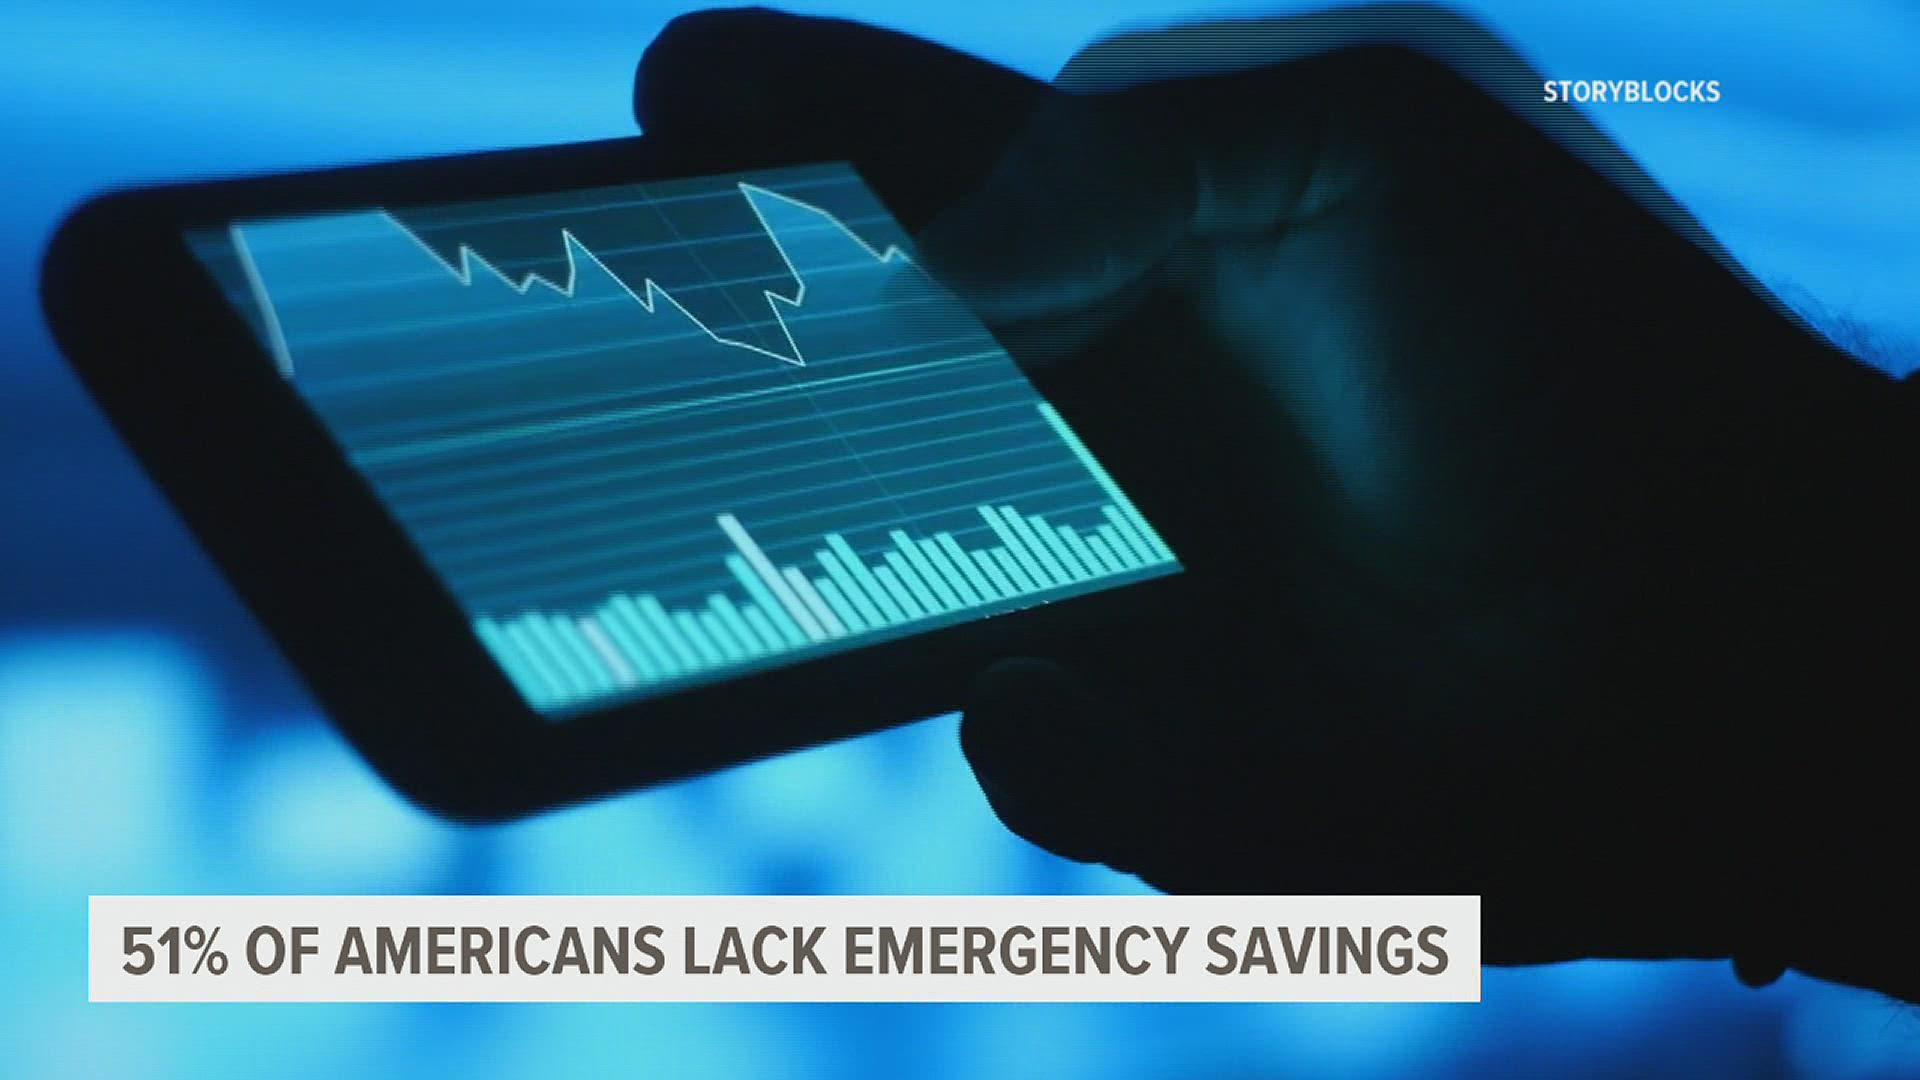 This includes 1 in 4 who indicate having no emergency savings at all, up from 21% in 2020.